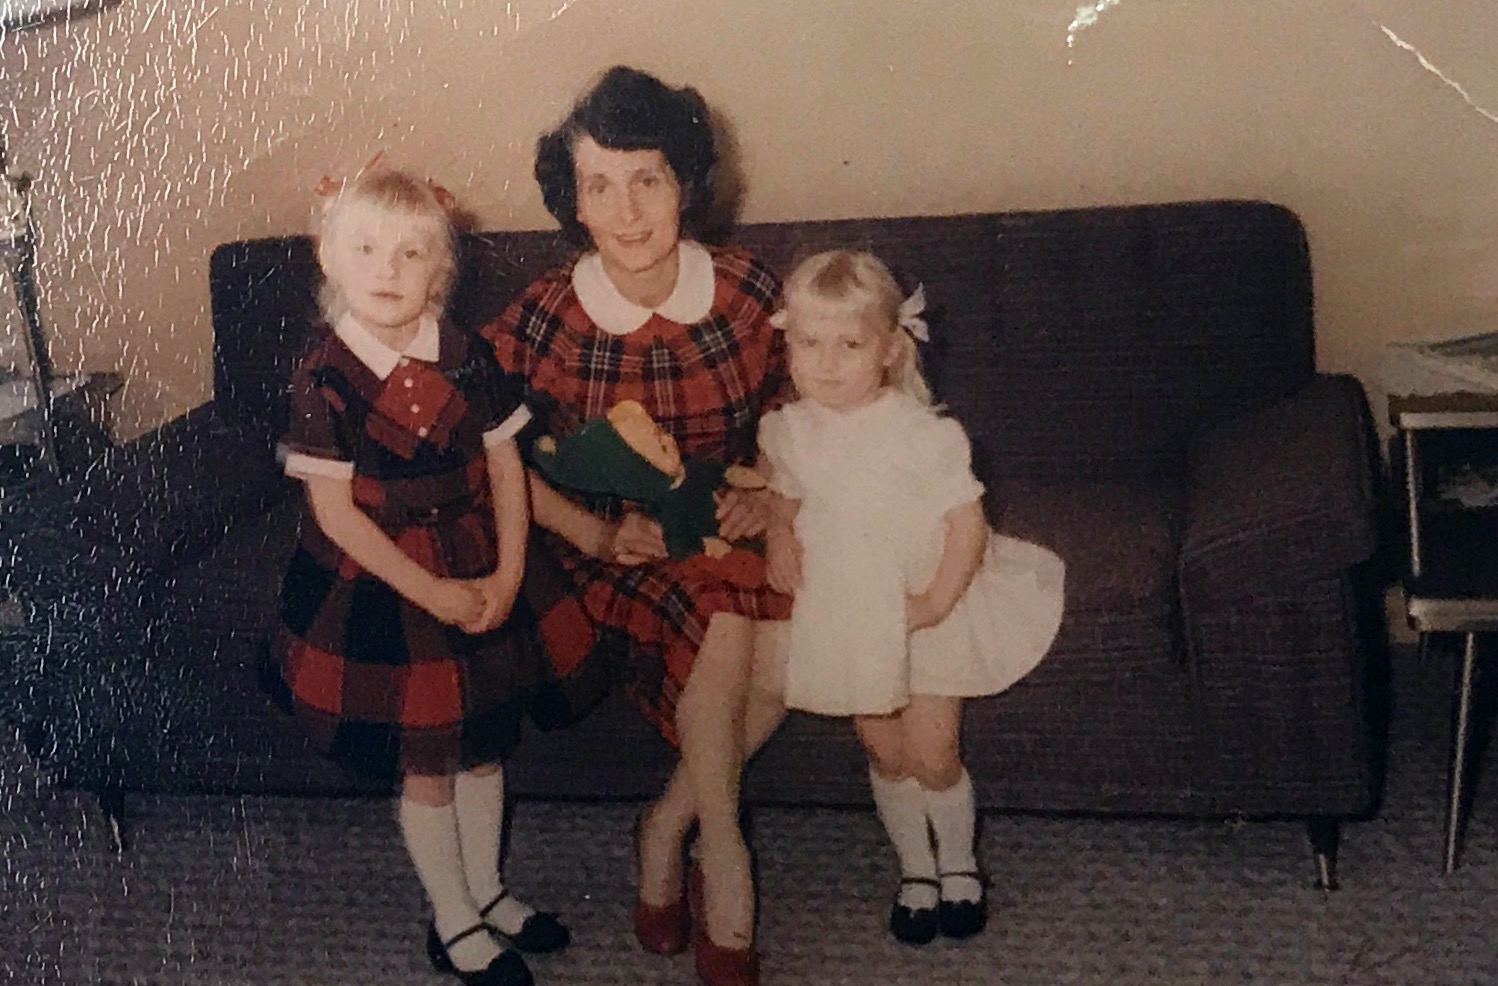 Three girls
About Easter time 1961